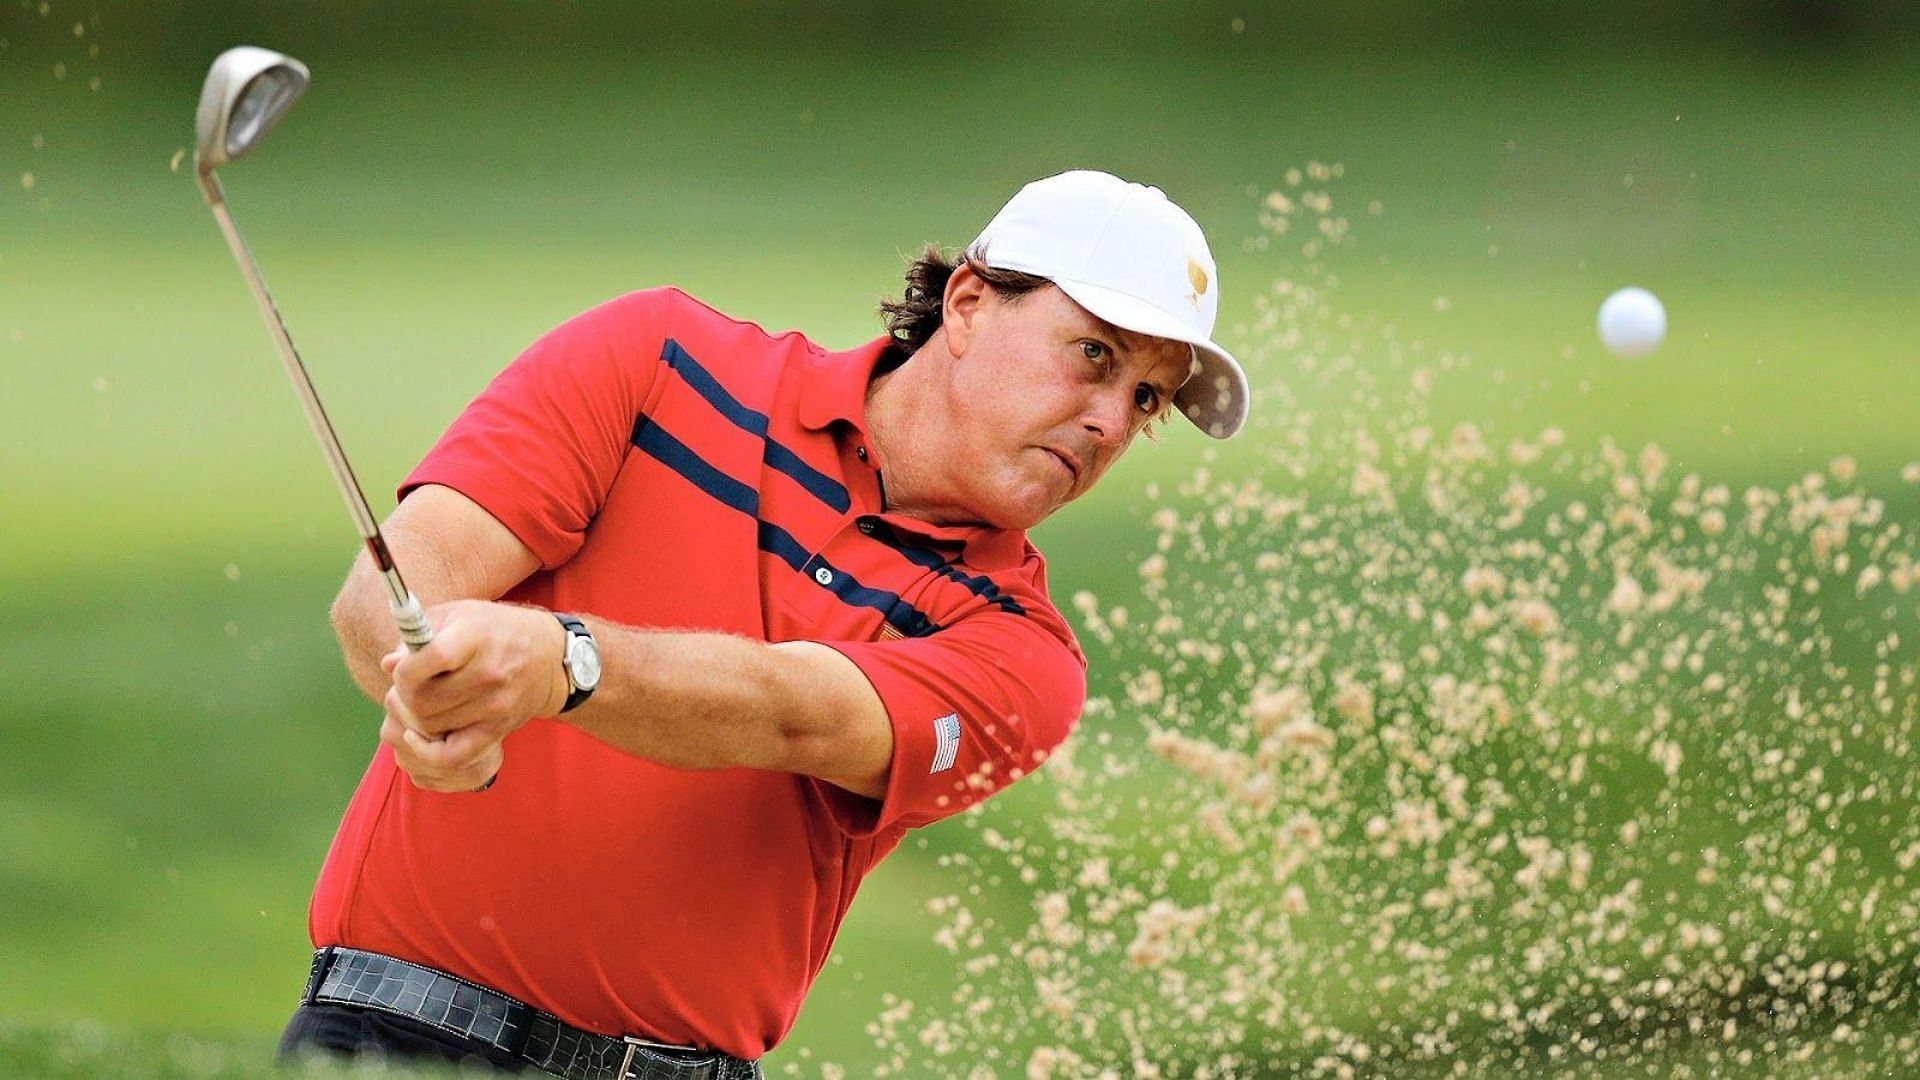 Why Does Phil Mickaelson Play Left-Handed? Real Reason Behind The Move